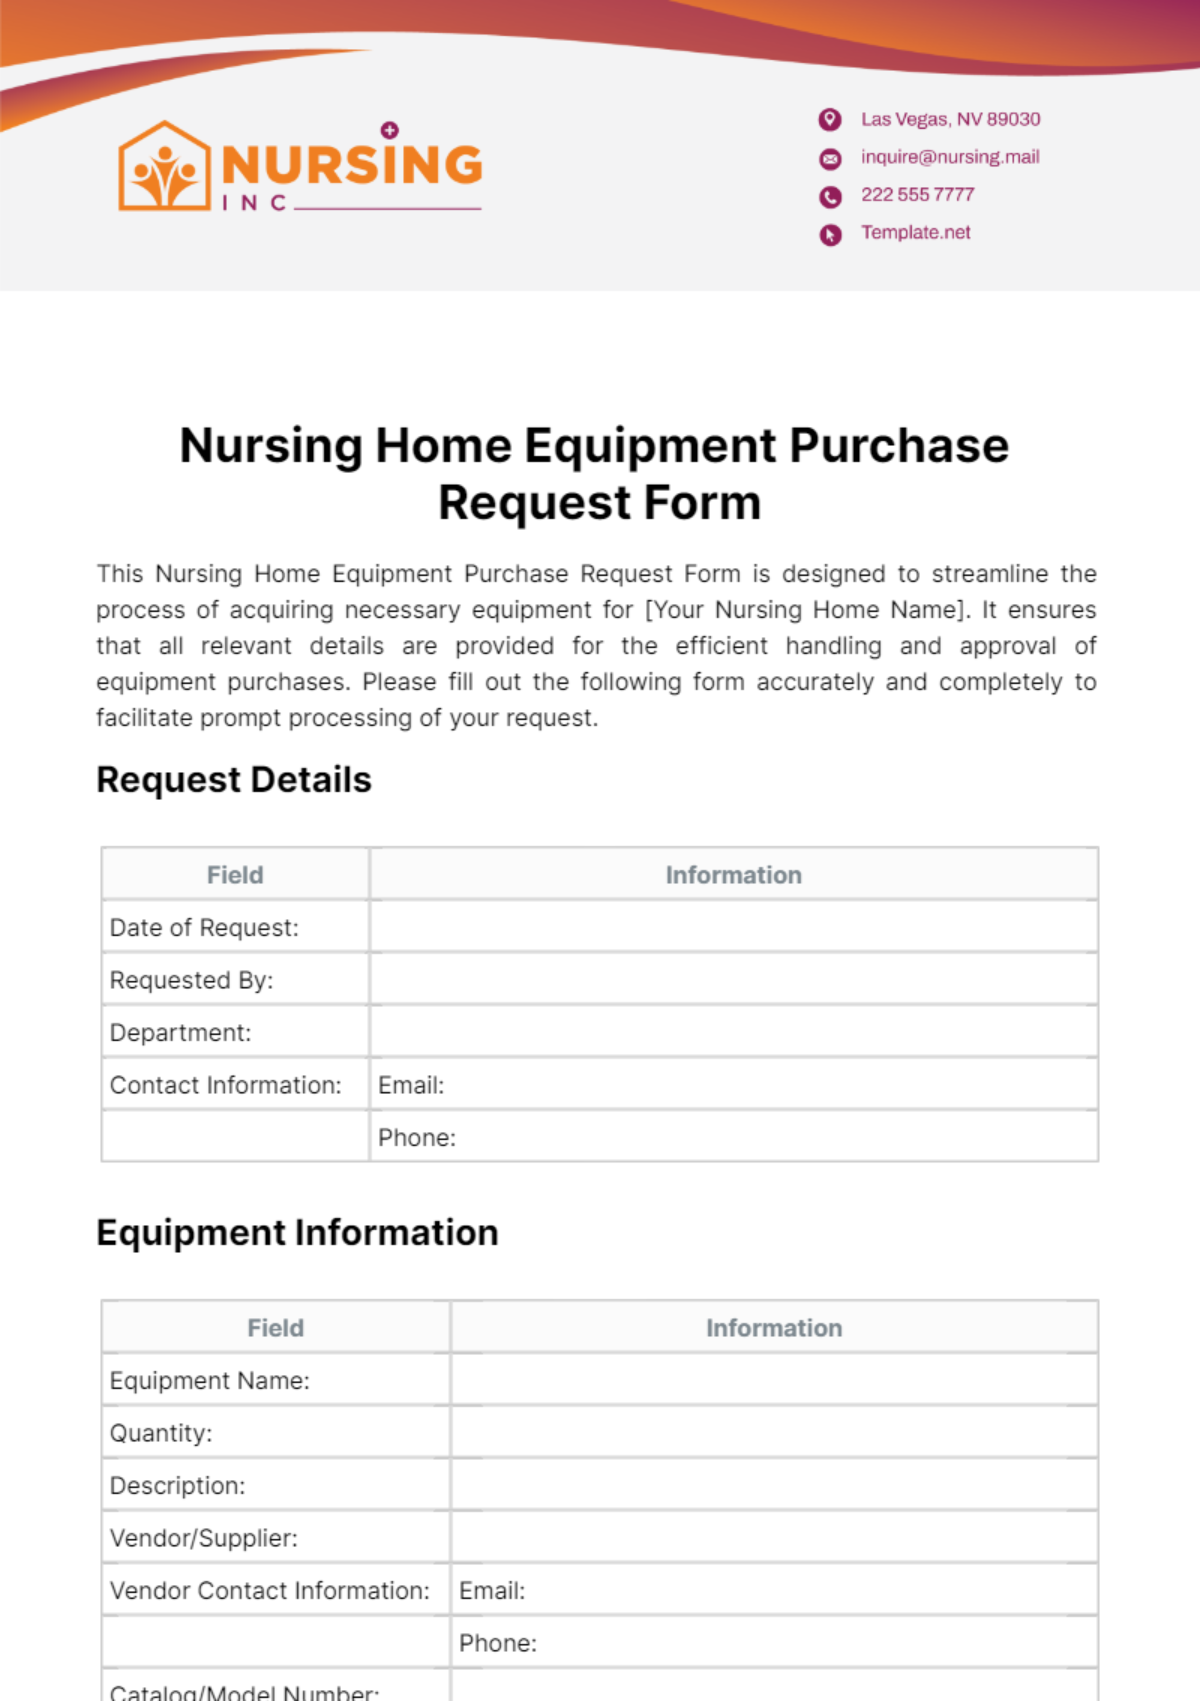 Nursing Home Equipment Purchase Request Form Template